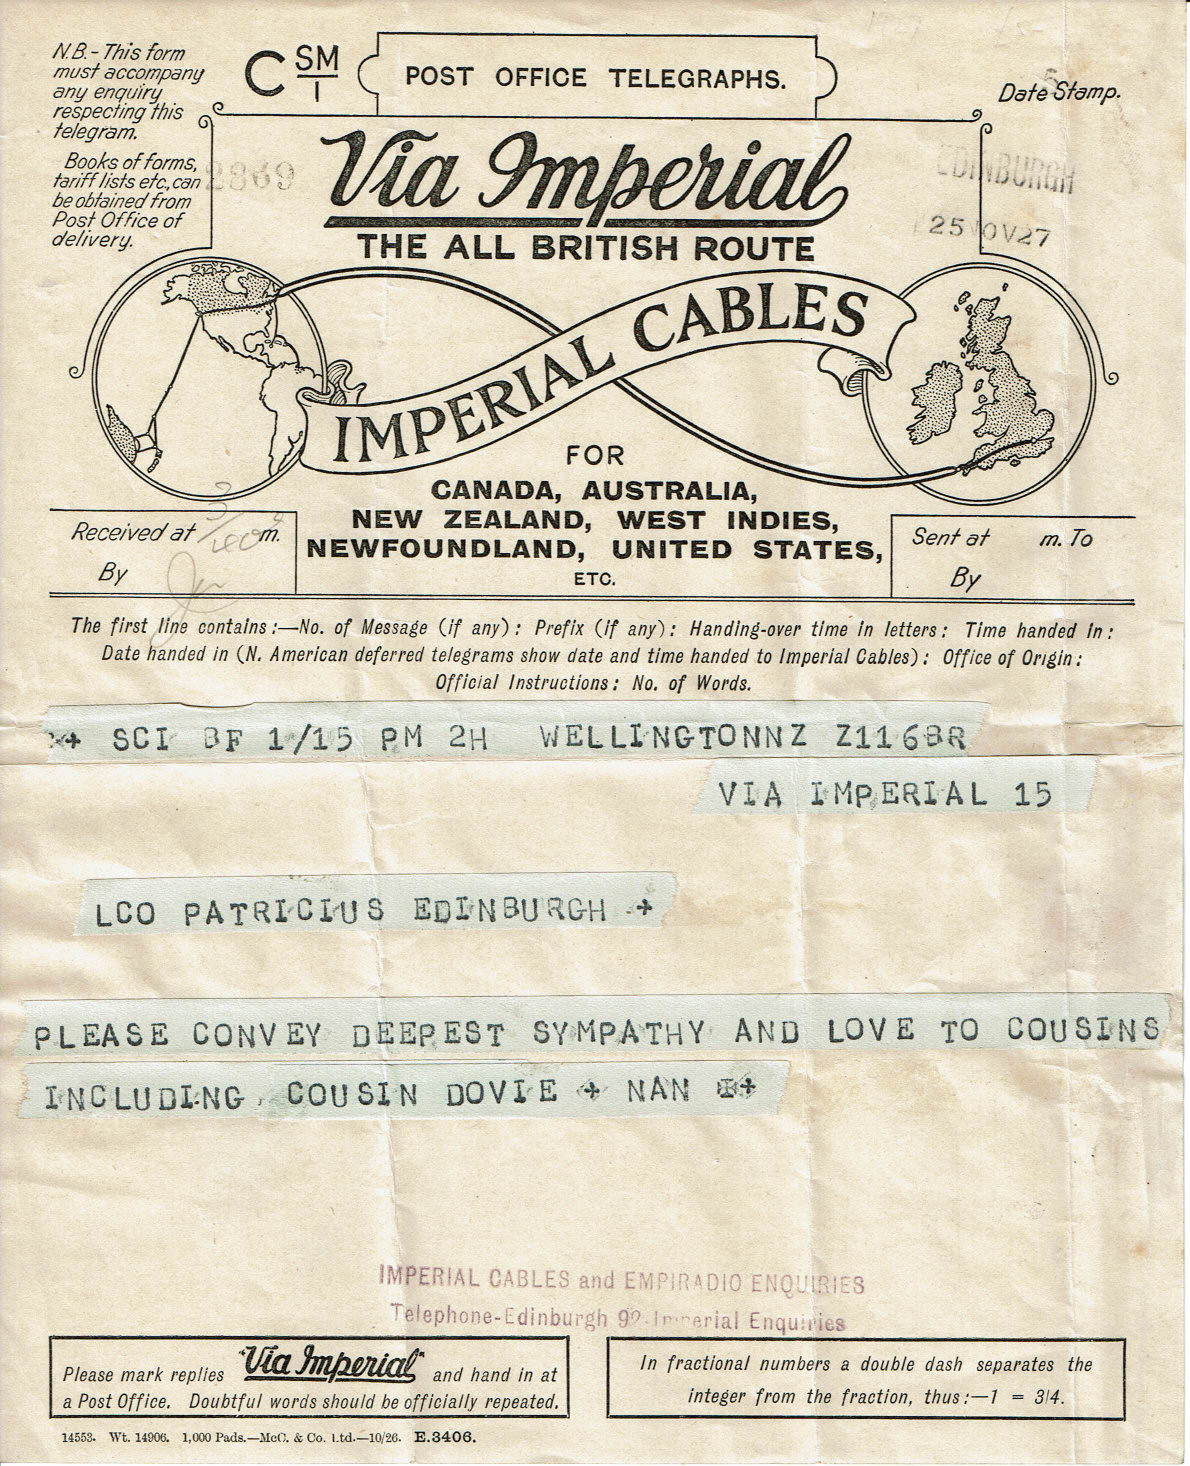 Imperial PO Telegraph Form - October 1926